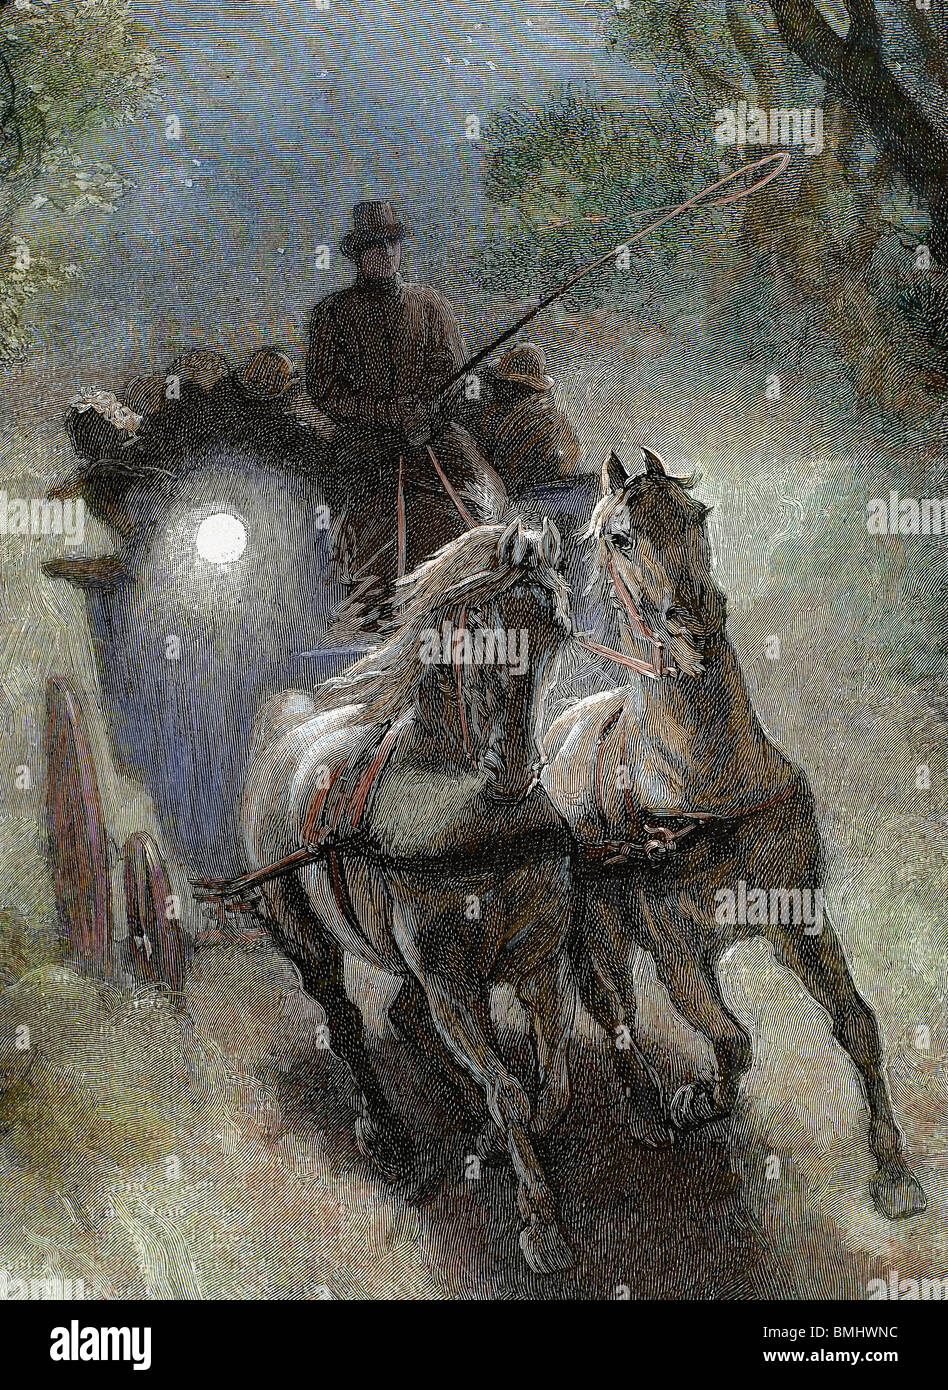 Stagecoach. 19th century engraving. Coloured. Stock Photo